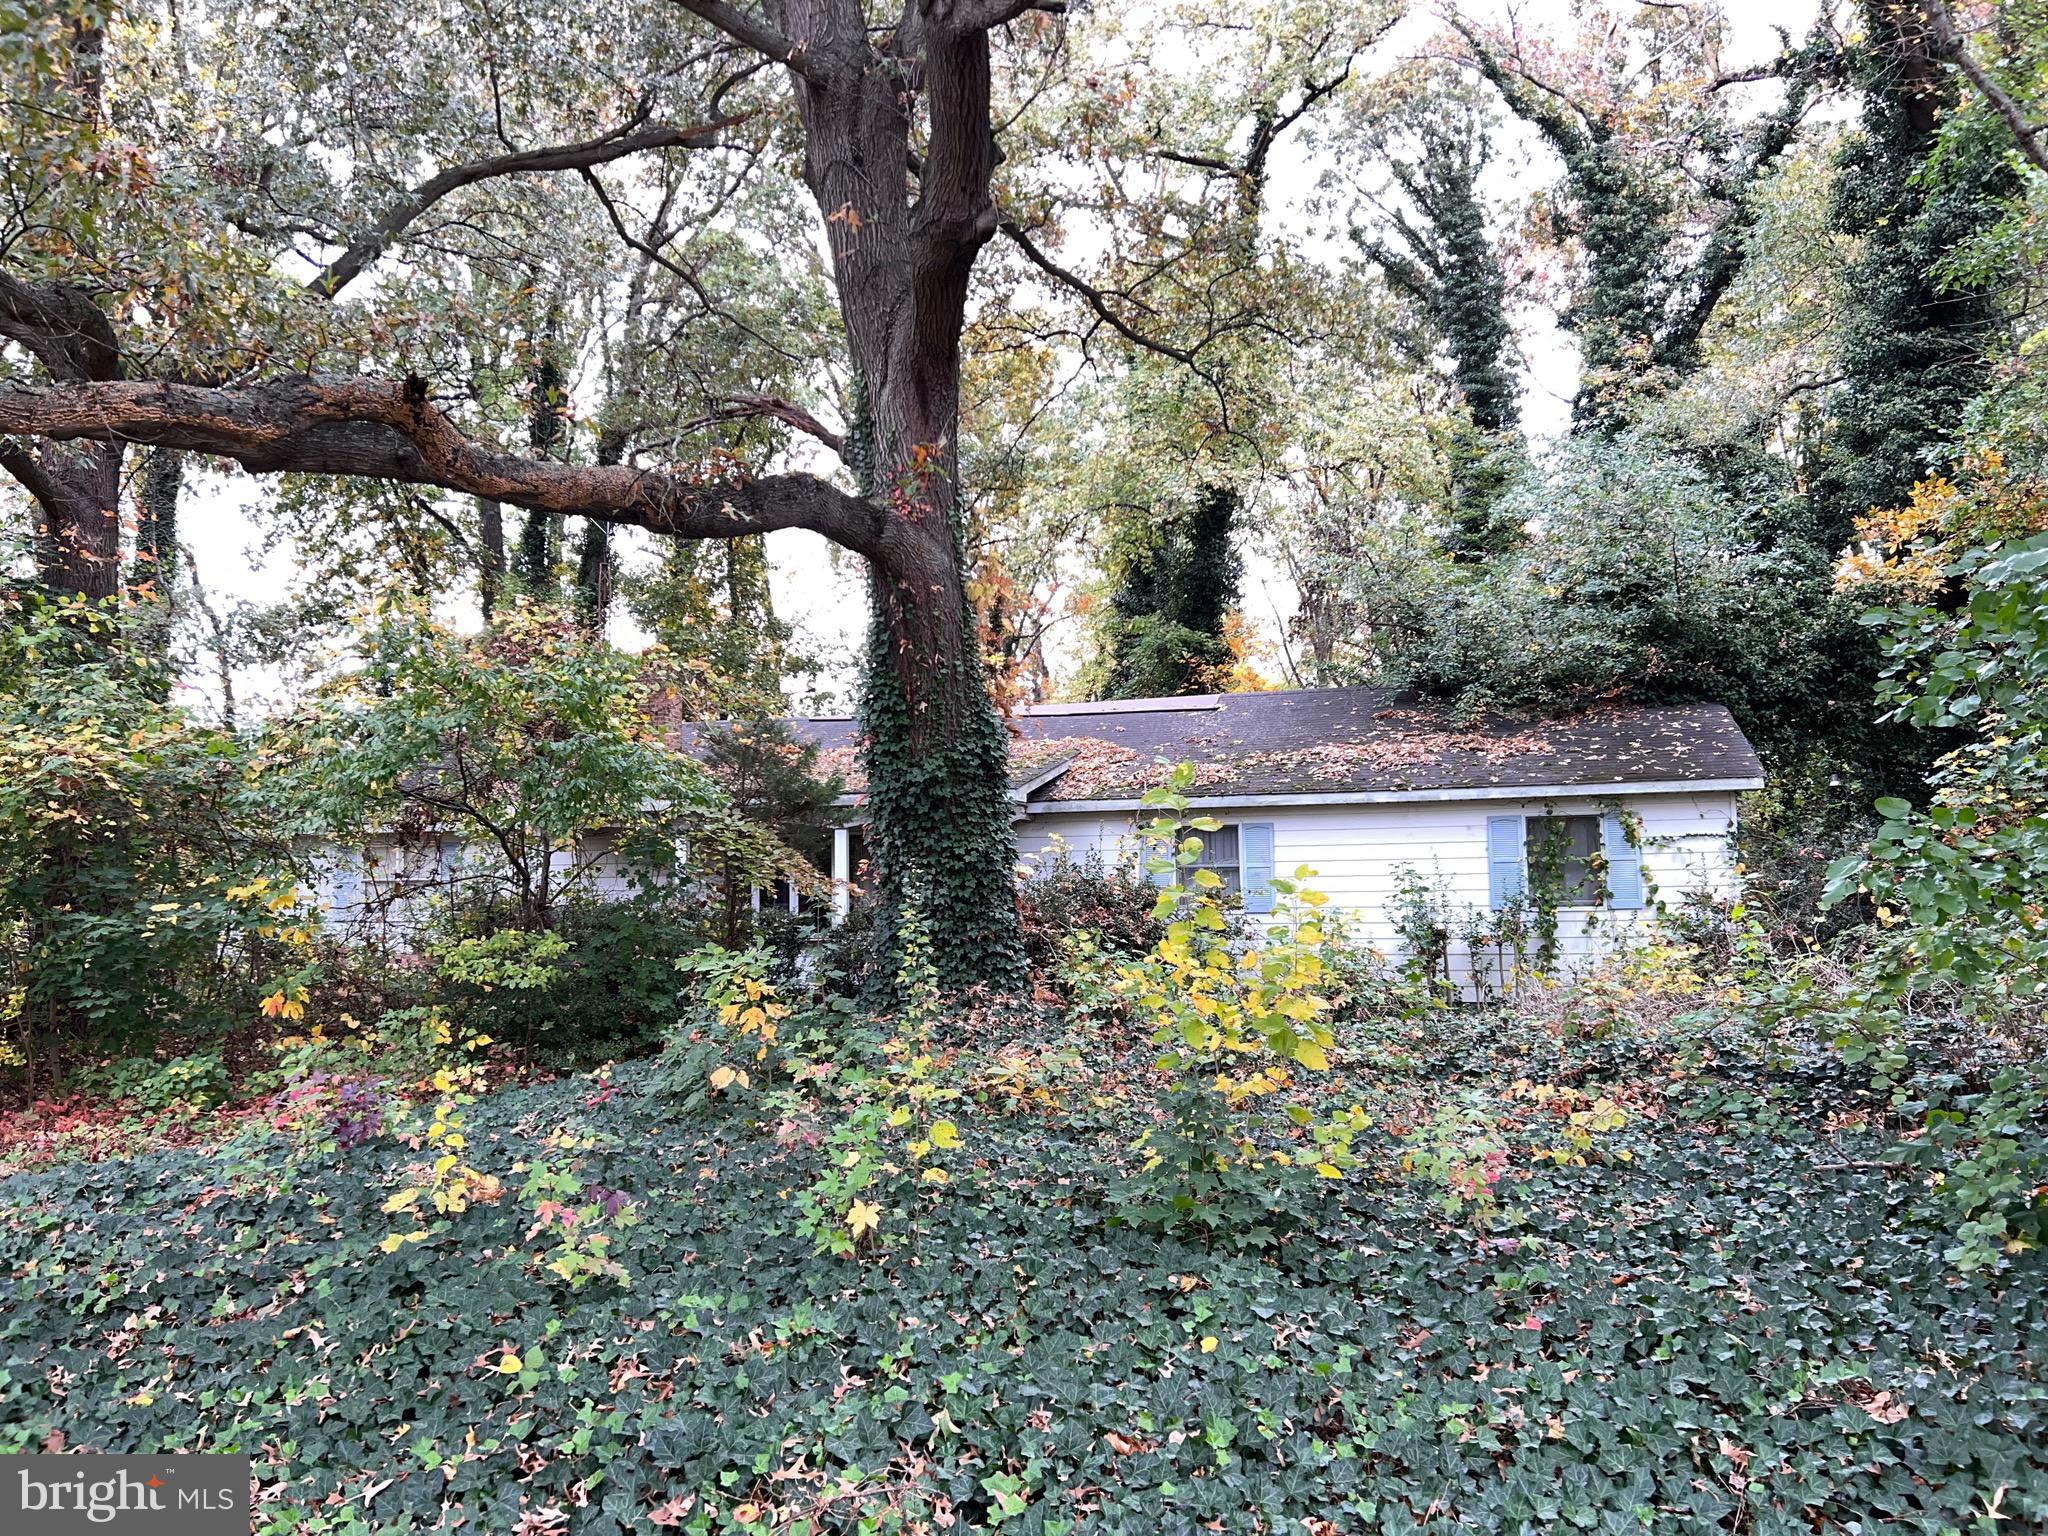 a view of house with a tree in the background